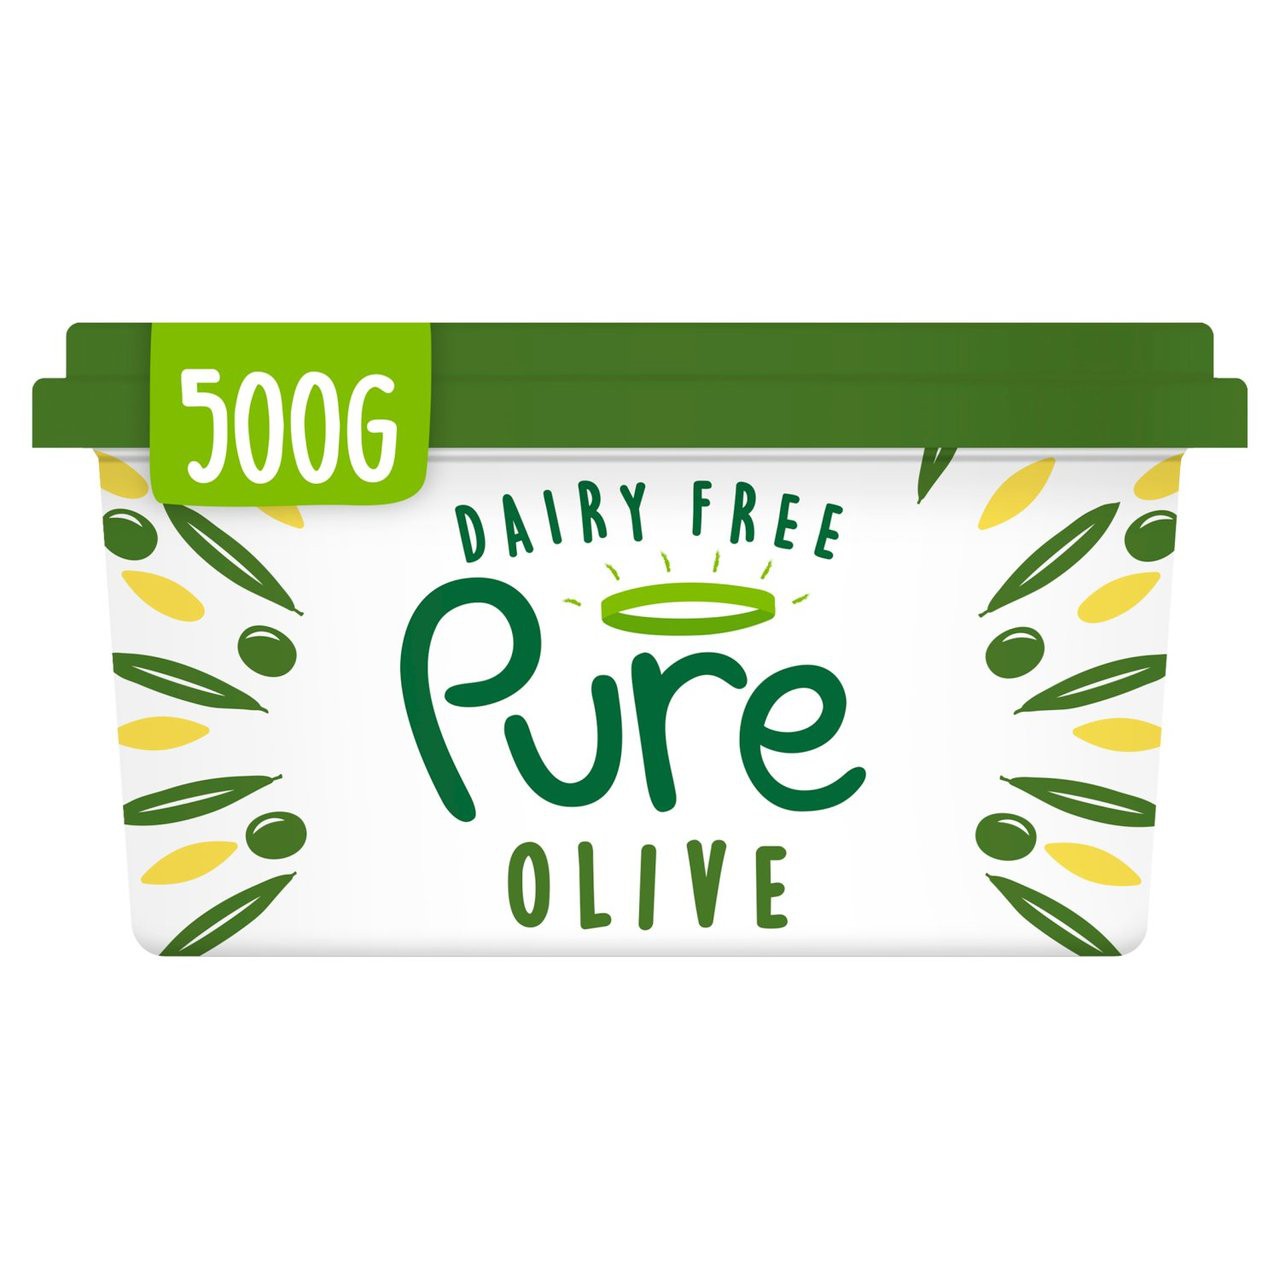 Pure+Dairy+Free+Olive+Spread+500g